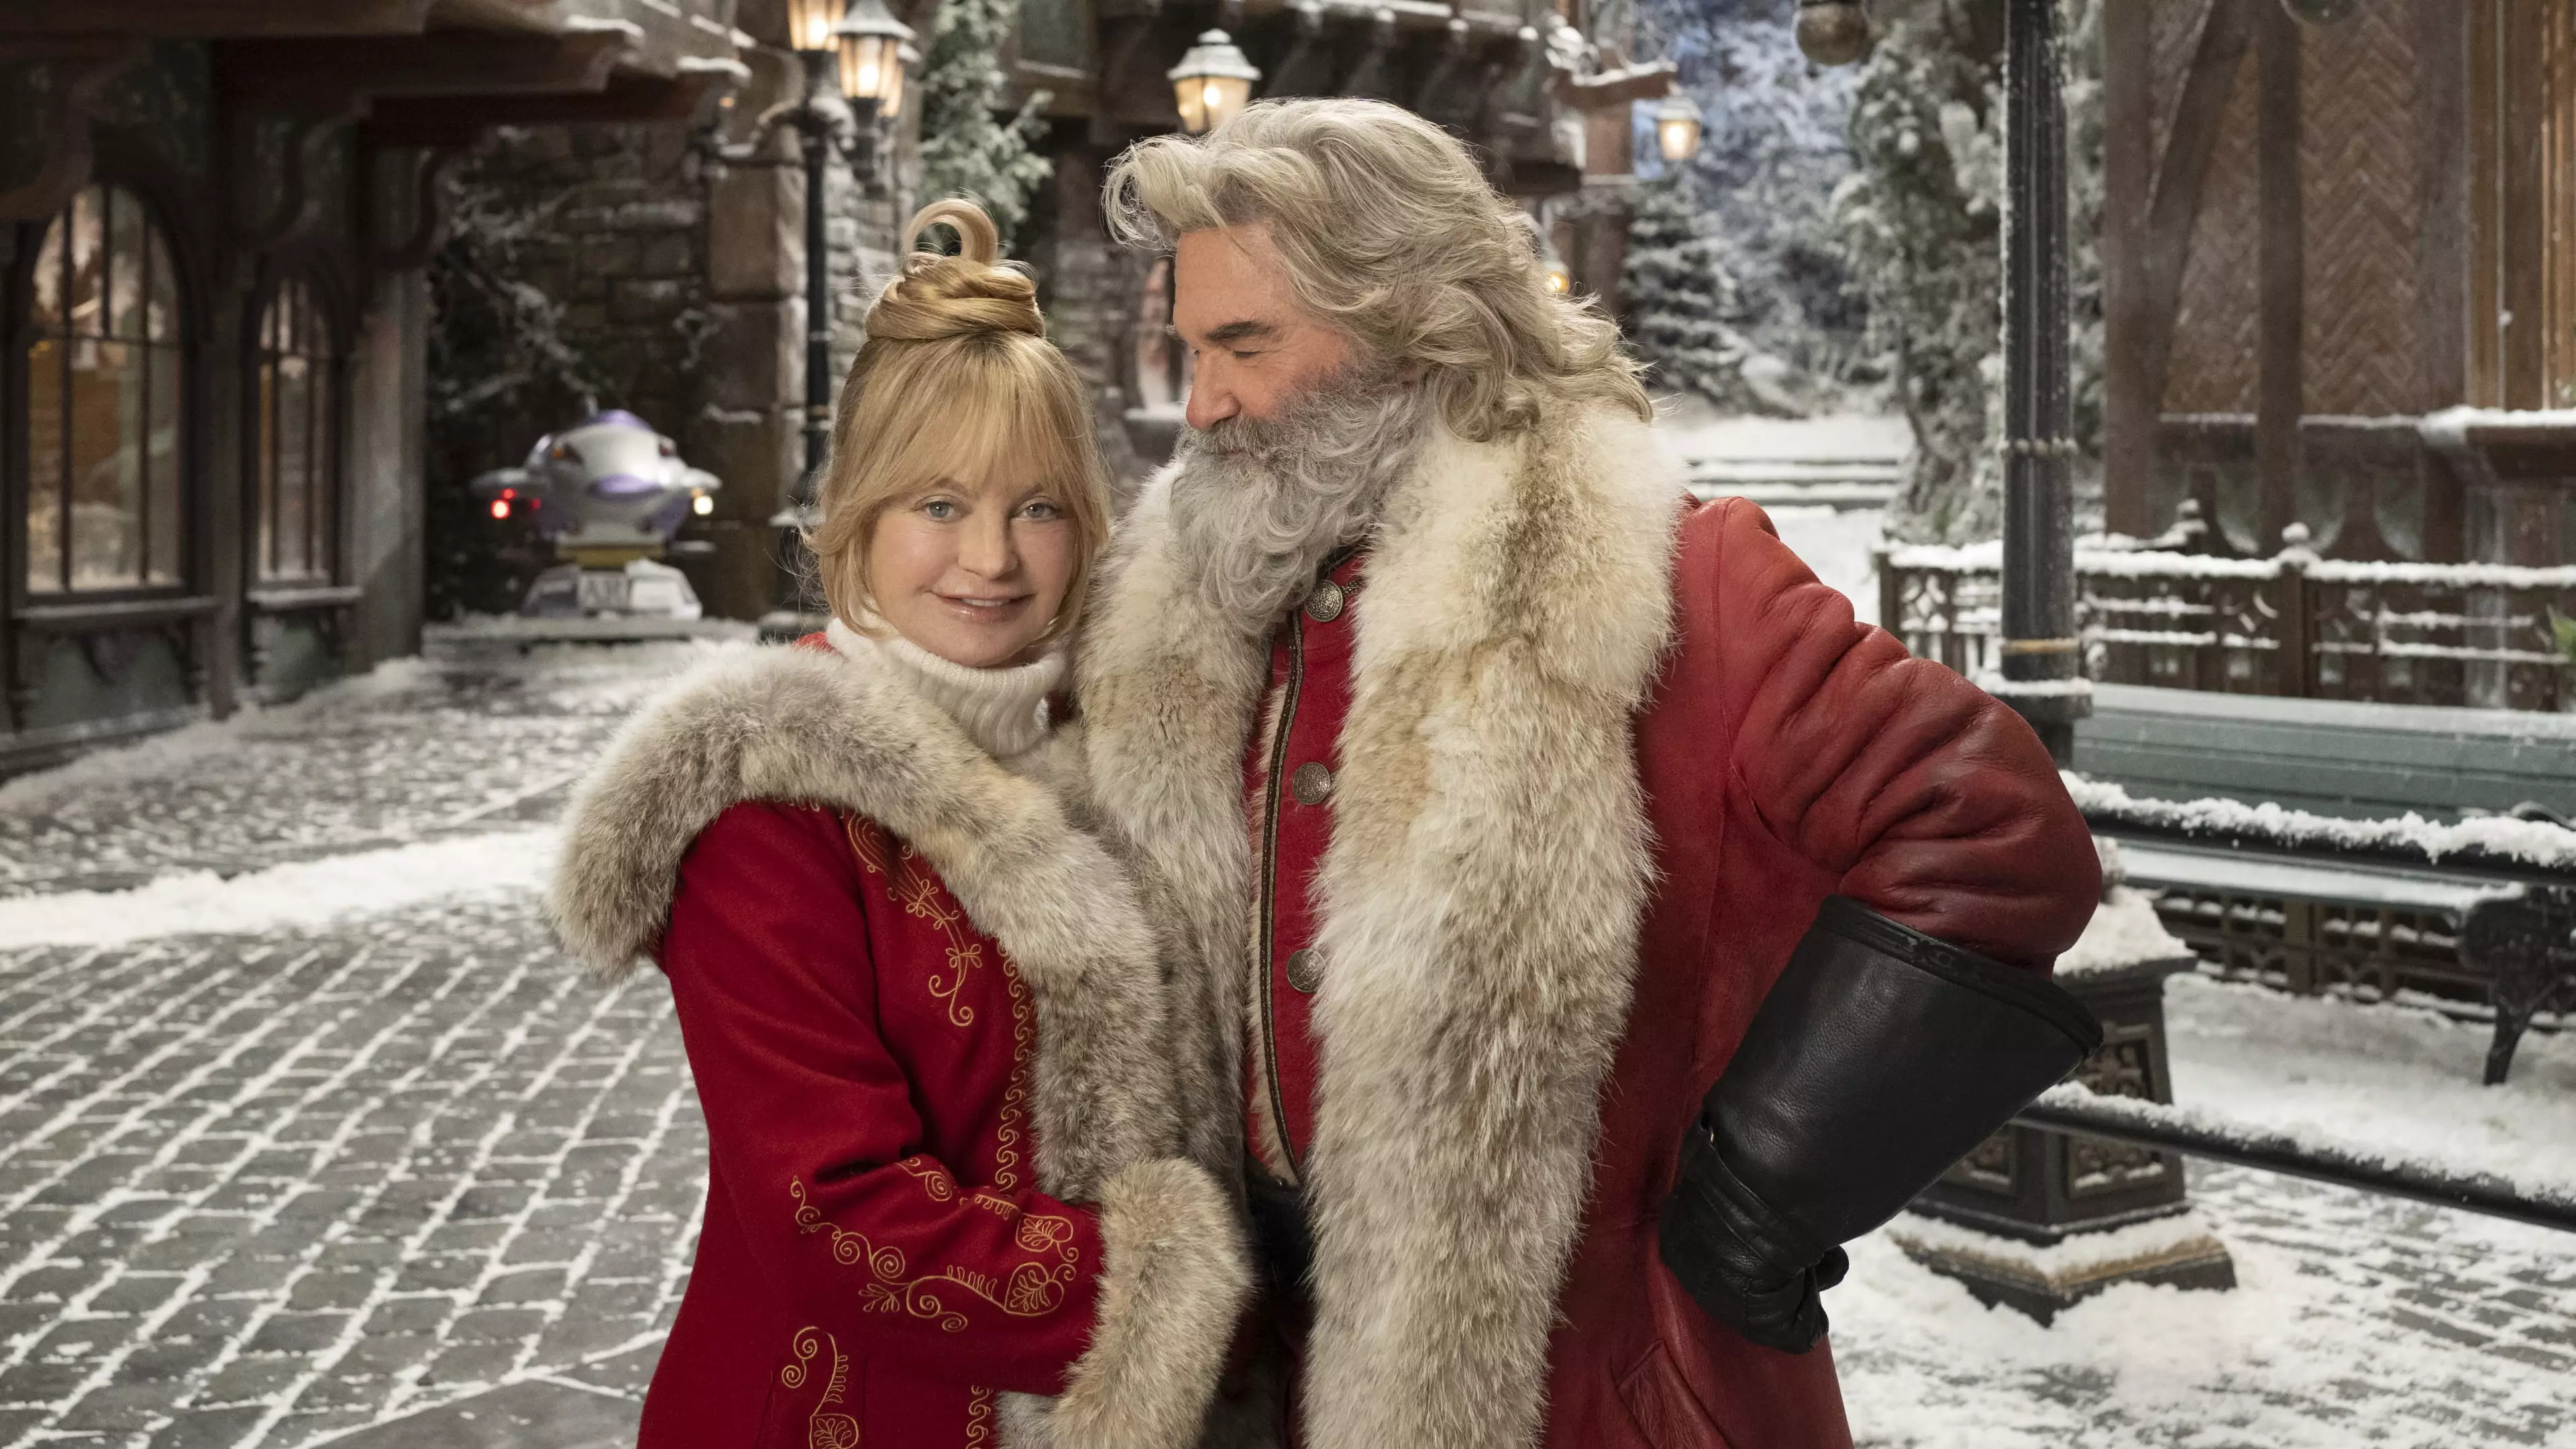 Starring in the sequel will be Kurt Russell and real-life partner Goldie Hawn (